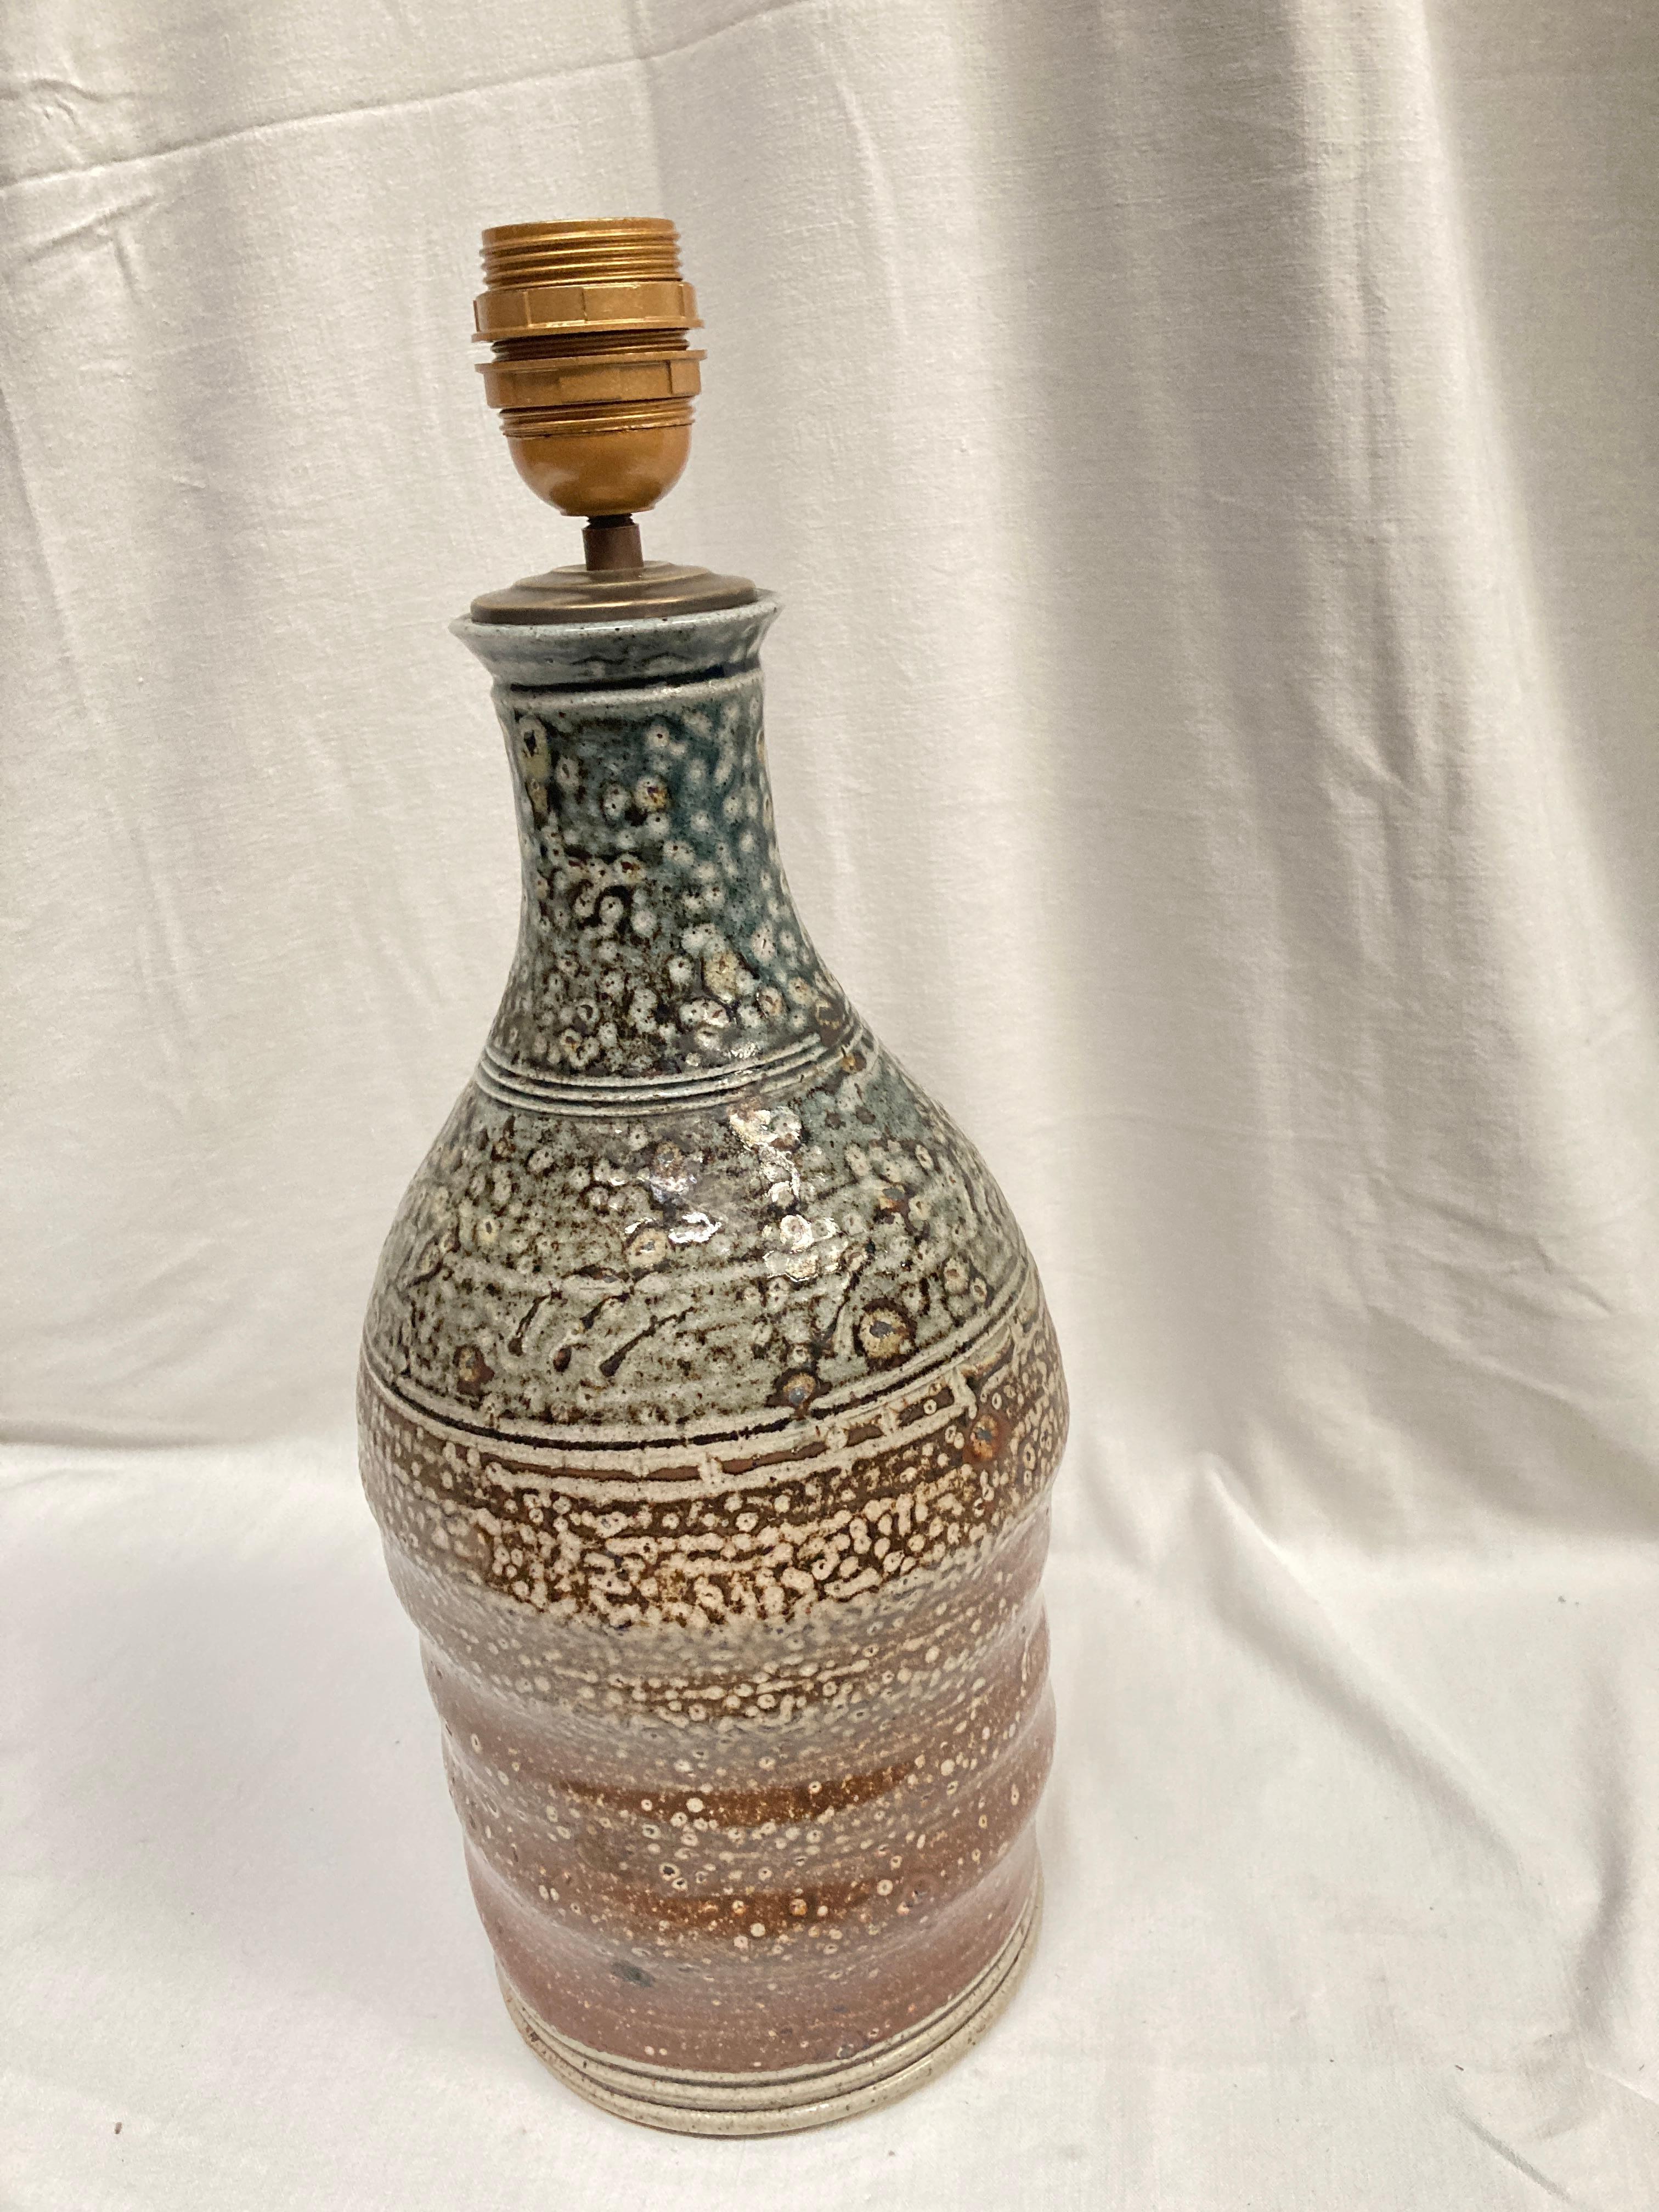 1970's studio pottery lamp
Very interesting colors with brown and grey
Dimensions given without shade
No shade included